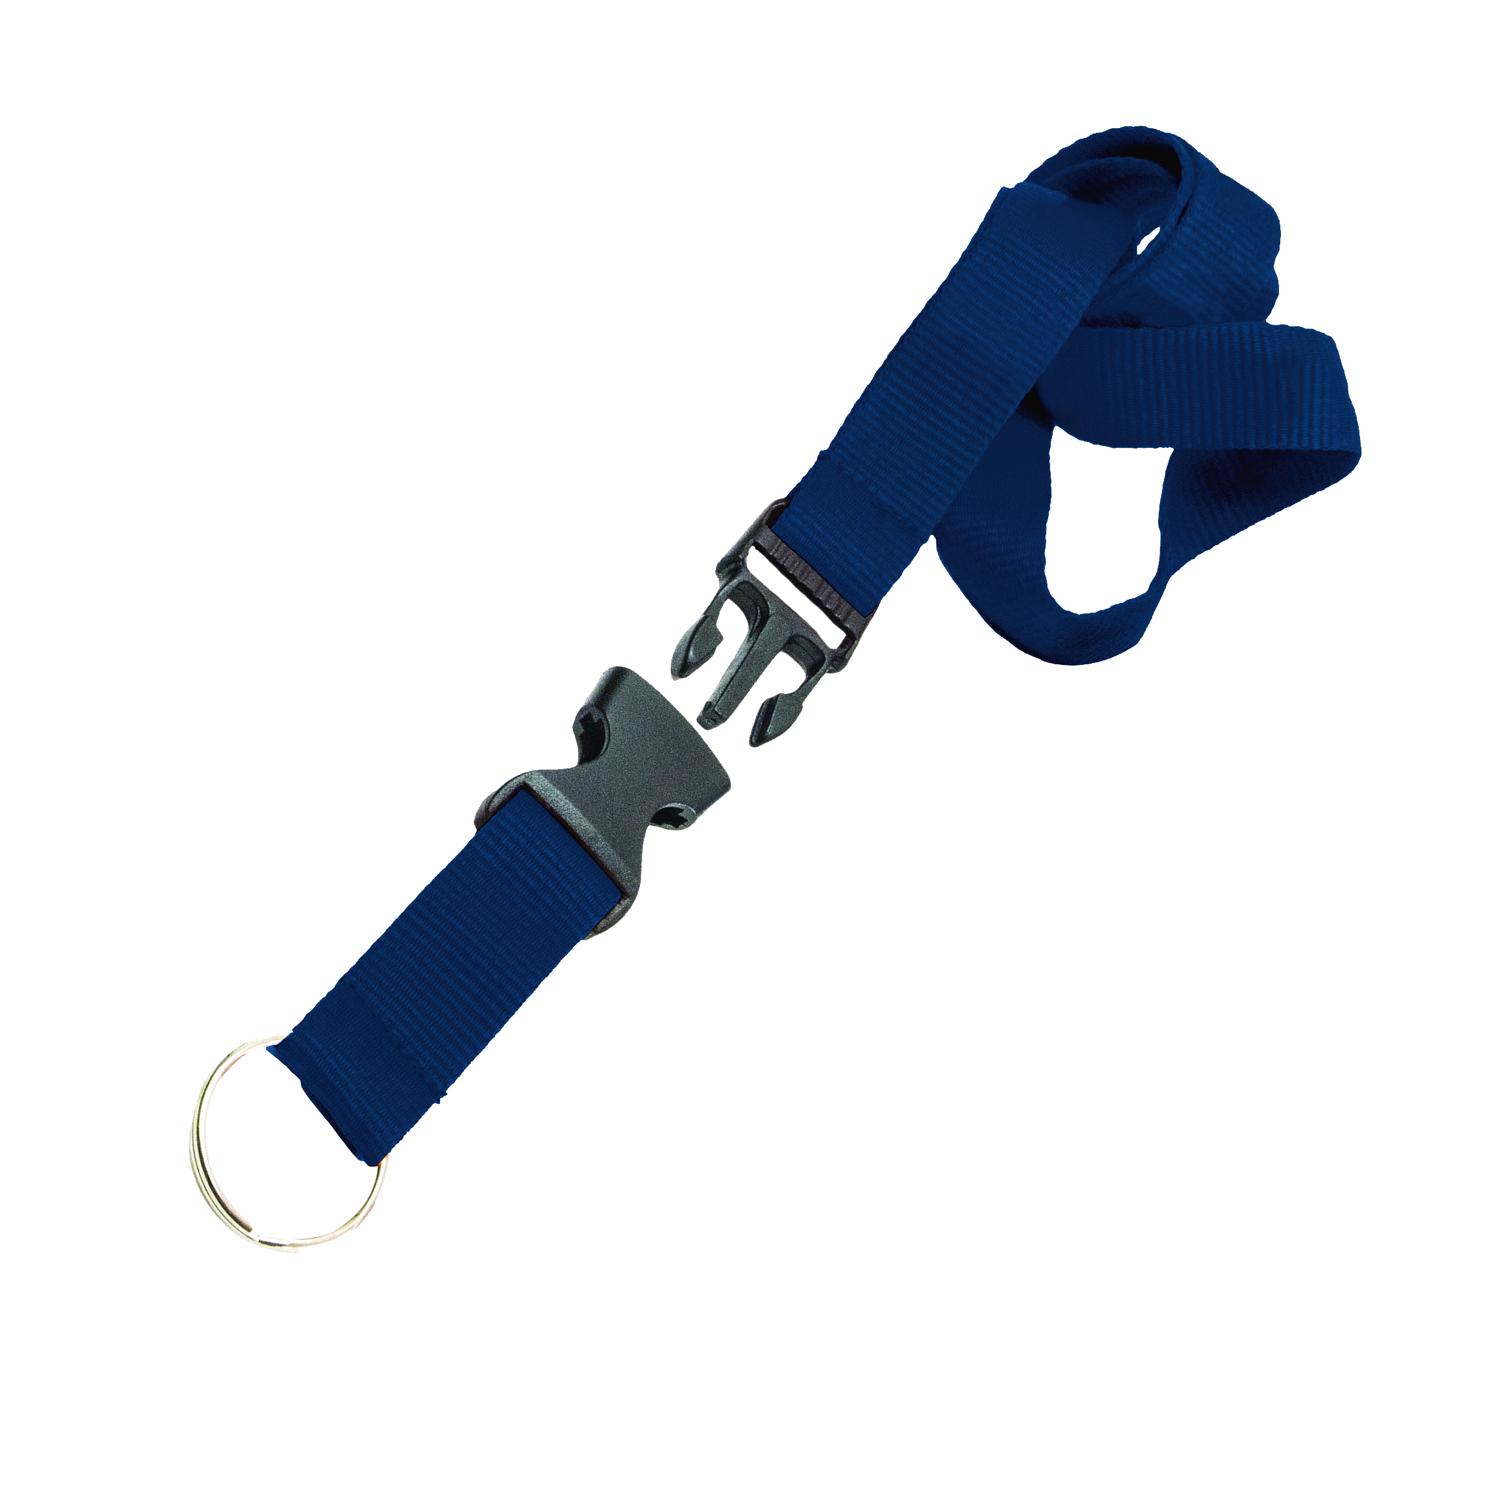 Customized Products. 1 INCH POLYESTER LANYARDS W/ SAFETY BREAKAWAY